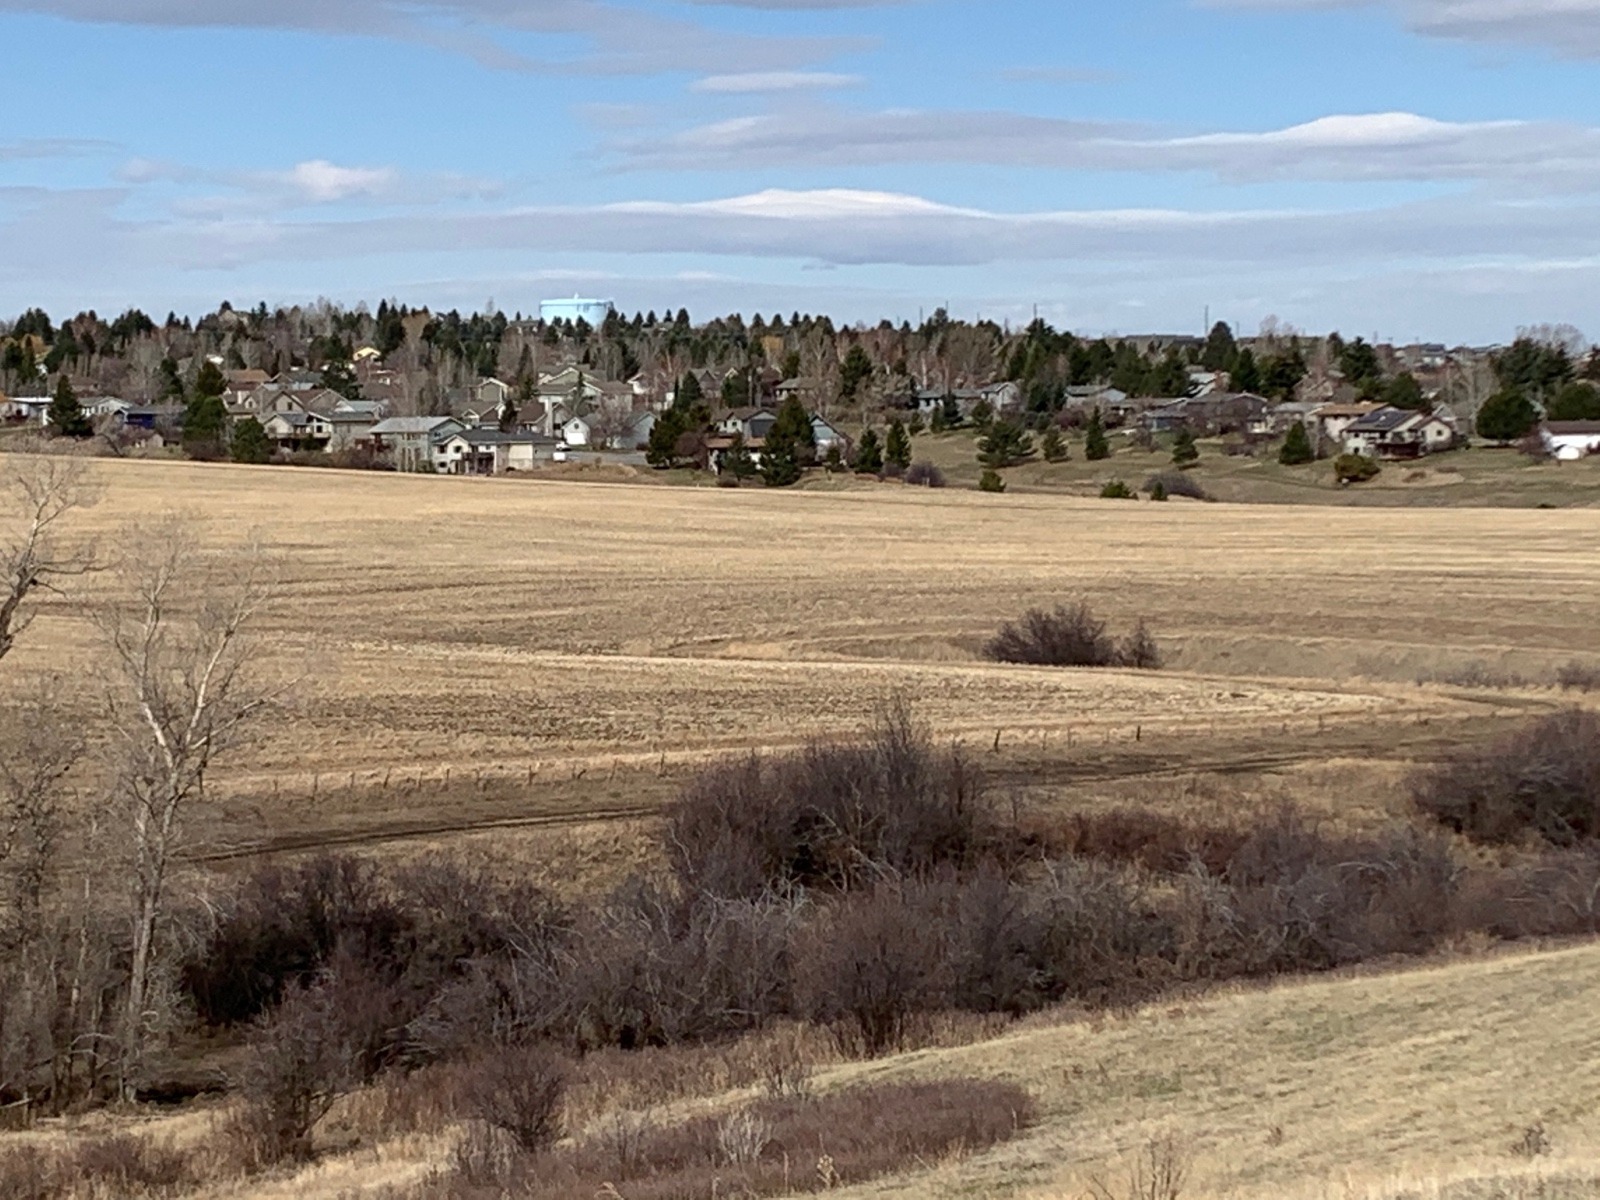 From this view it looks like the advance of urban Bozeman stops on a hard line but it's misleading. Were one to turn 180 degrees in the other direction, the view would reveal islands of rural subdivisions in Gallatin County that already have displaced wildlife. The impacts will really take hold as infill occurs and migration corridors for species like elk are lost. This same scenario exists in valleys throughout Greater Yellowstone.  Photo by Todd Wilkinson